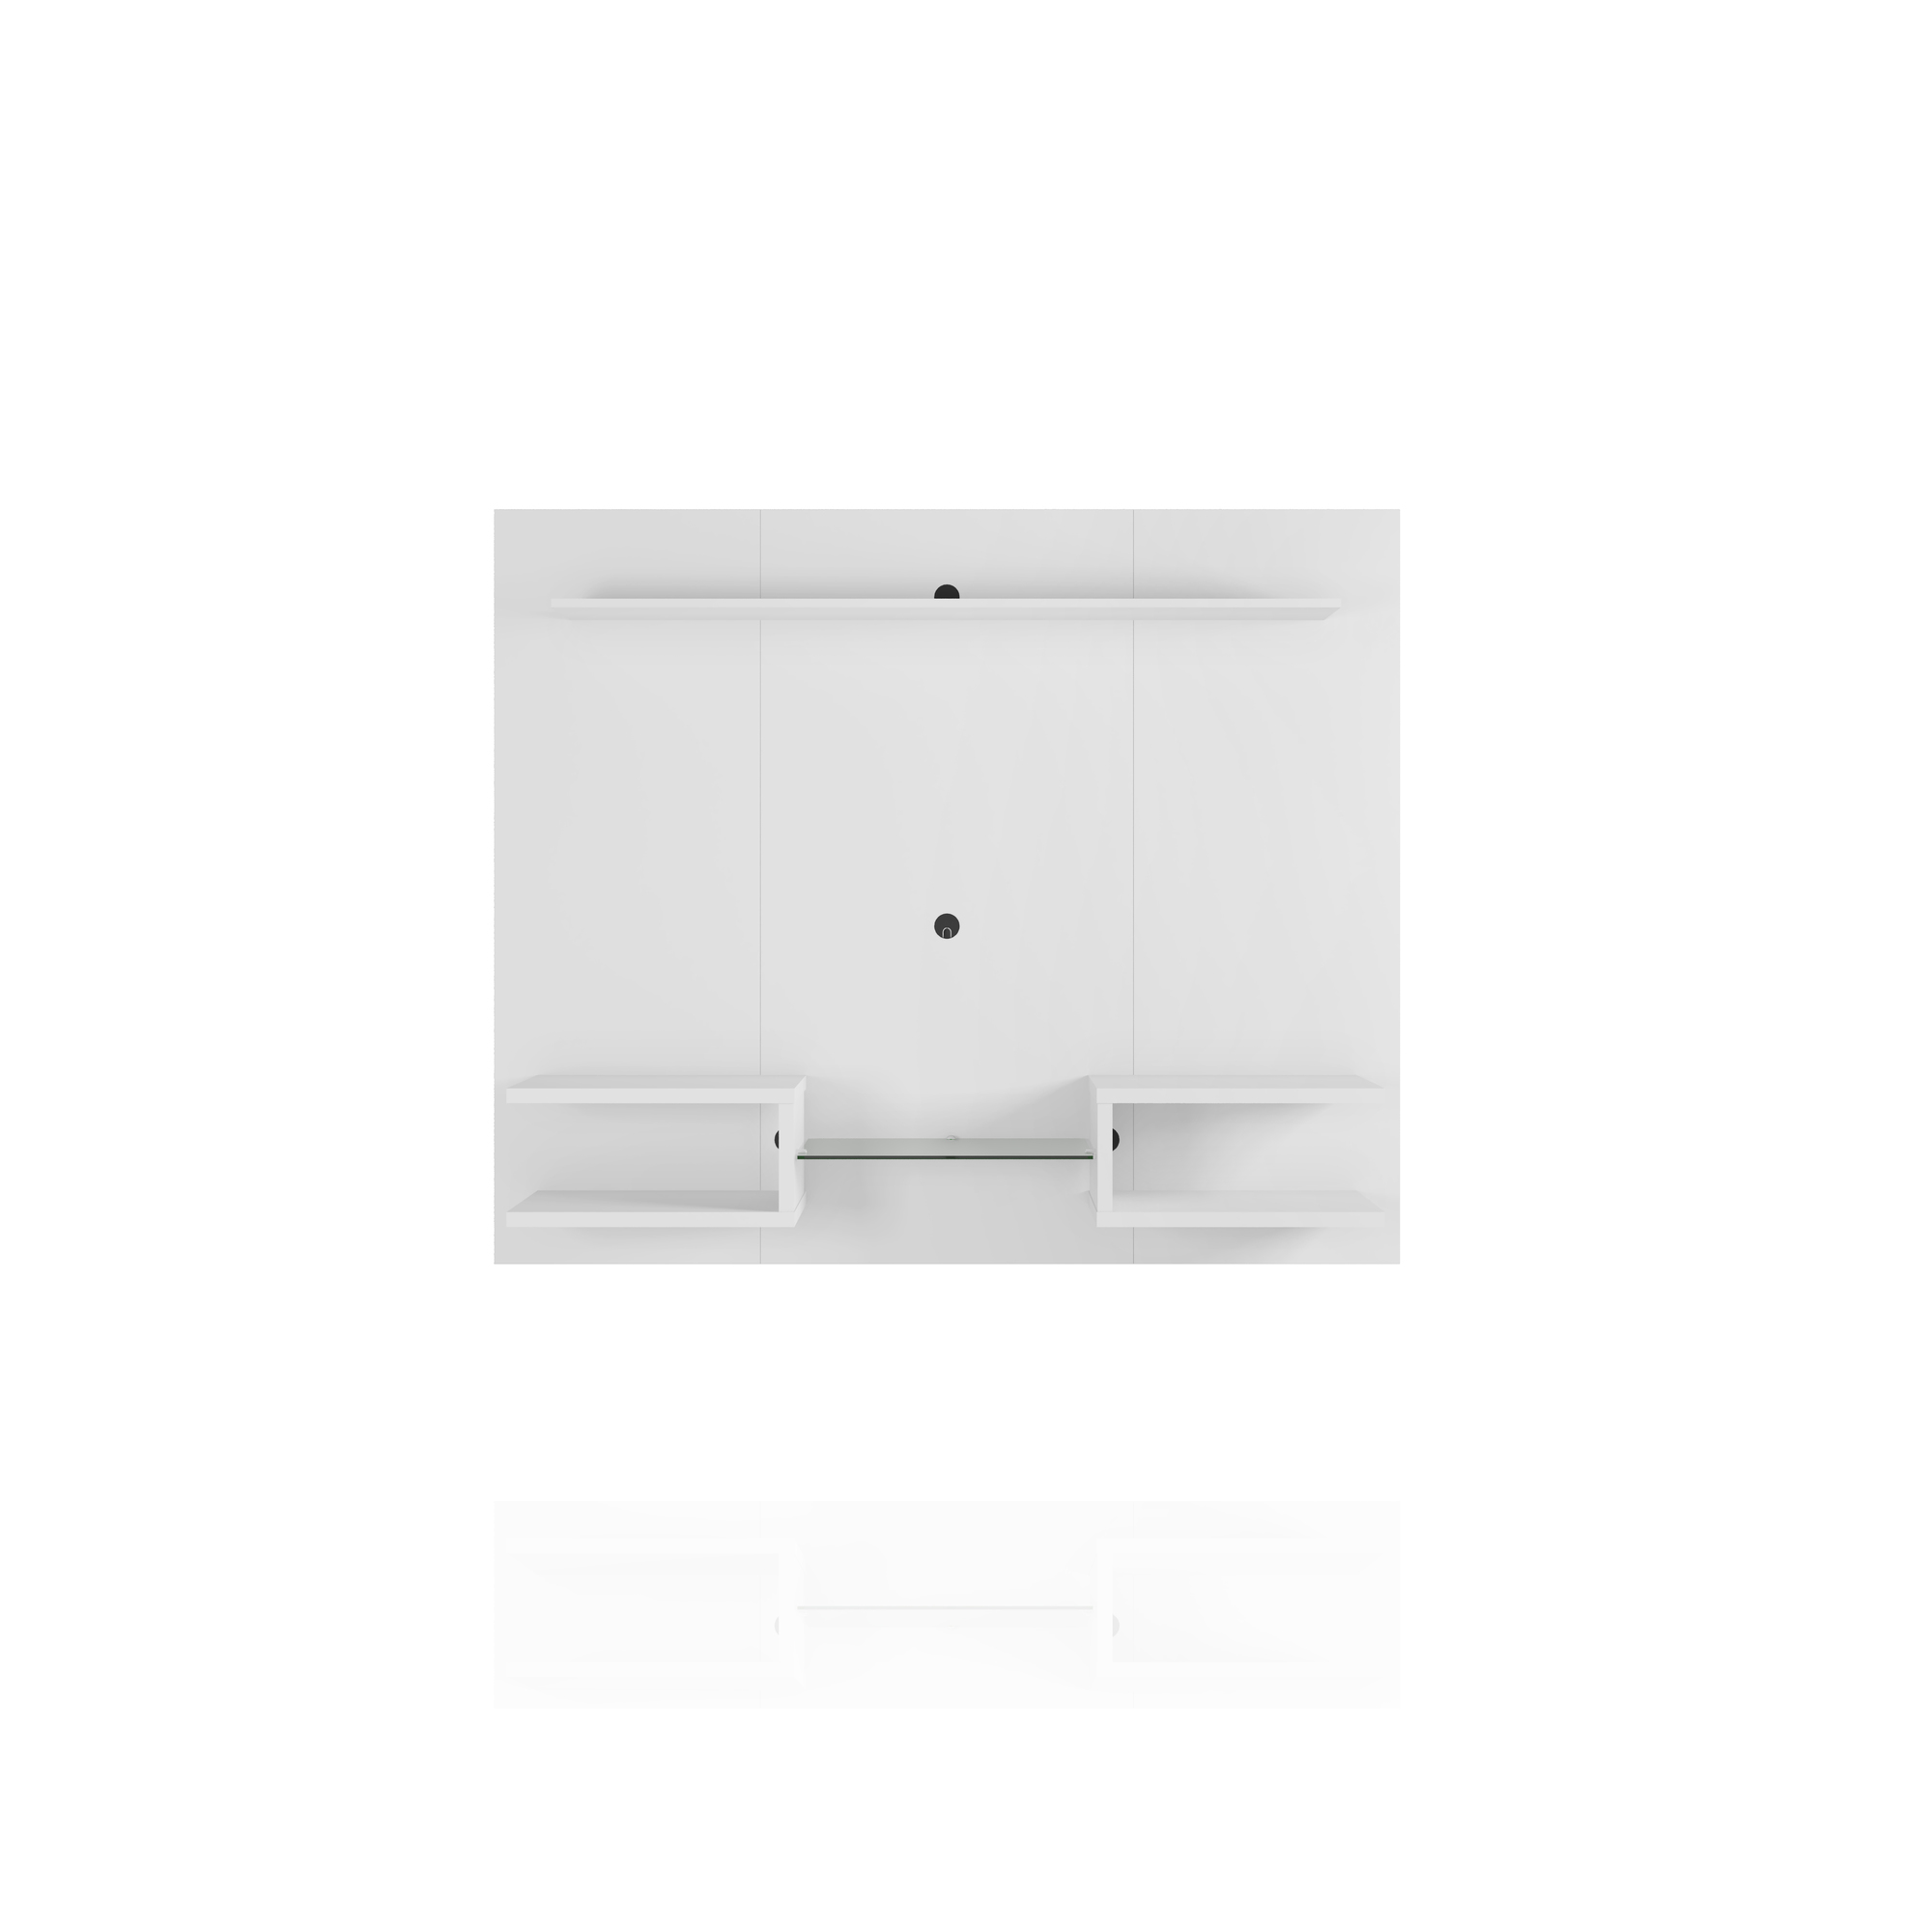 Manhattan Comfort, Plaza 64.25 Modern Floating Wall Ent Cntr in White, Width 64.25 in, Height 53.54 in, Depth 11.65 in, Model 224BMC